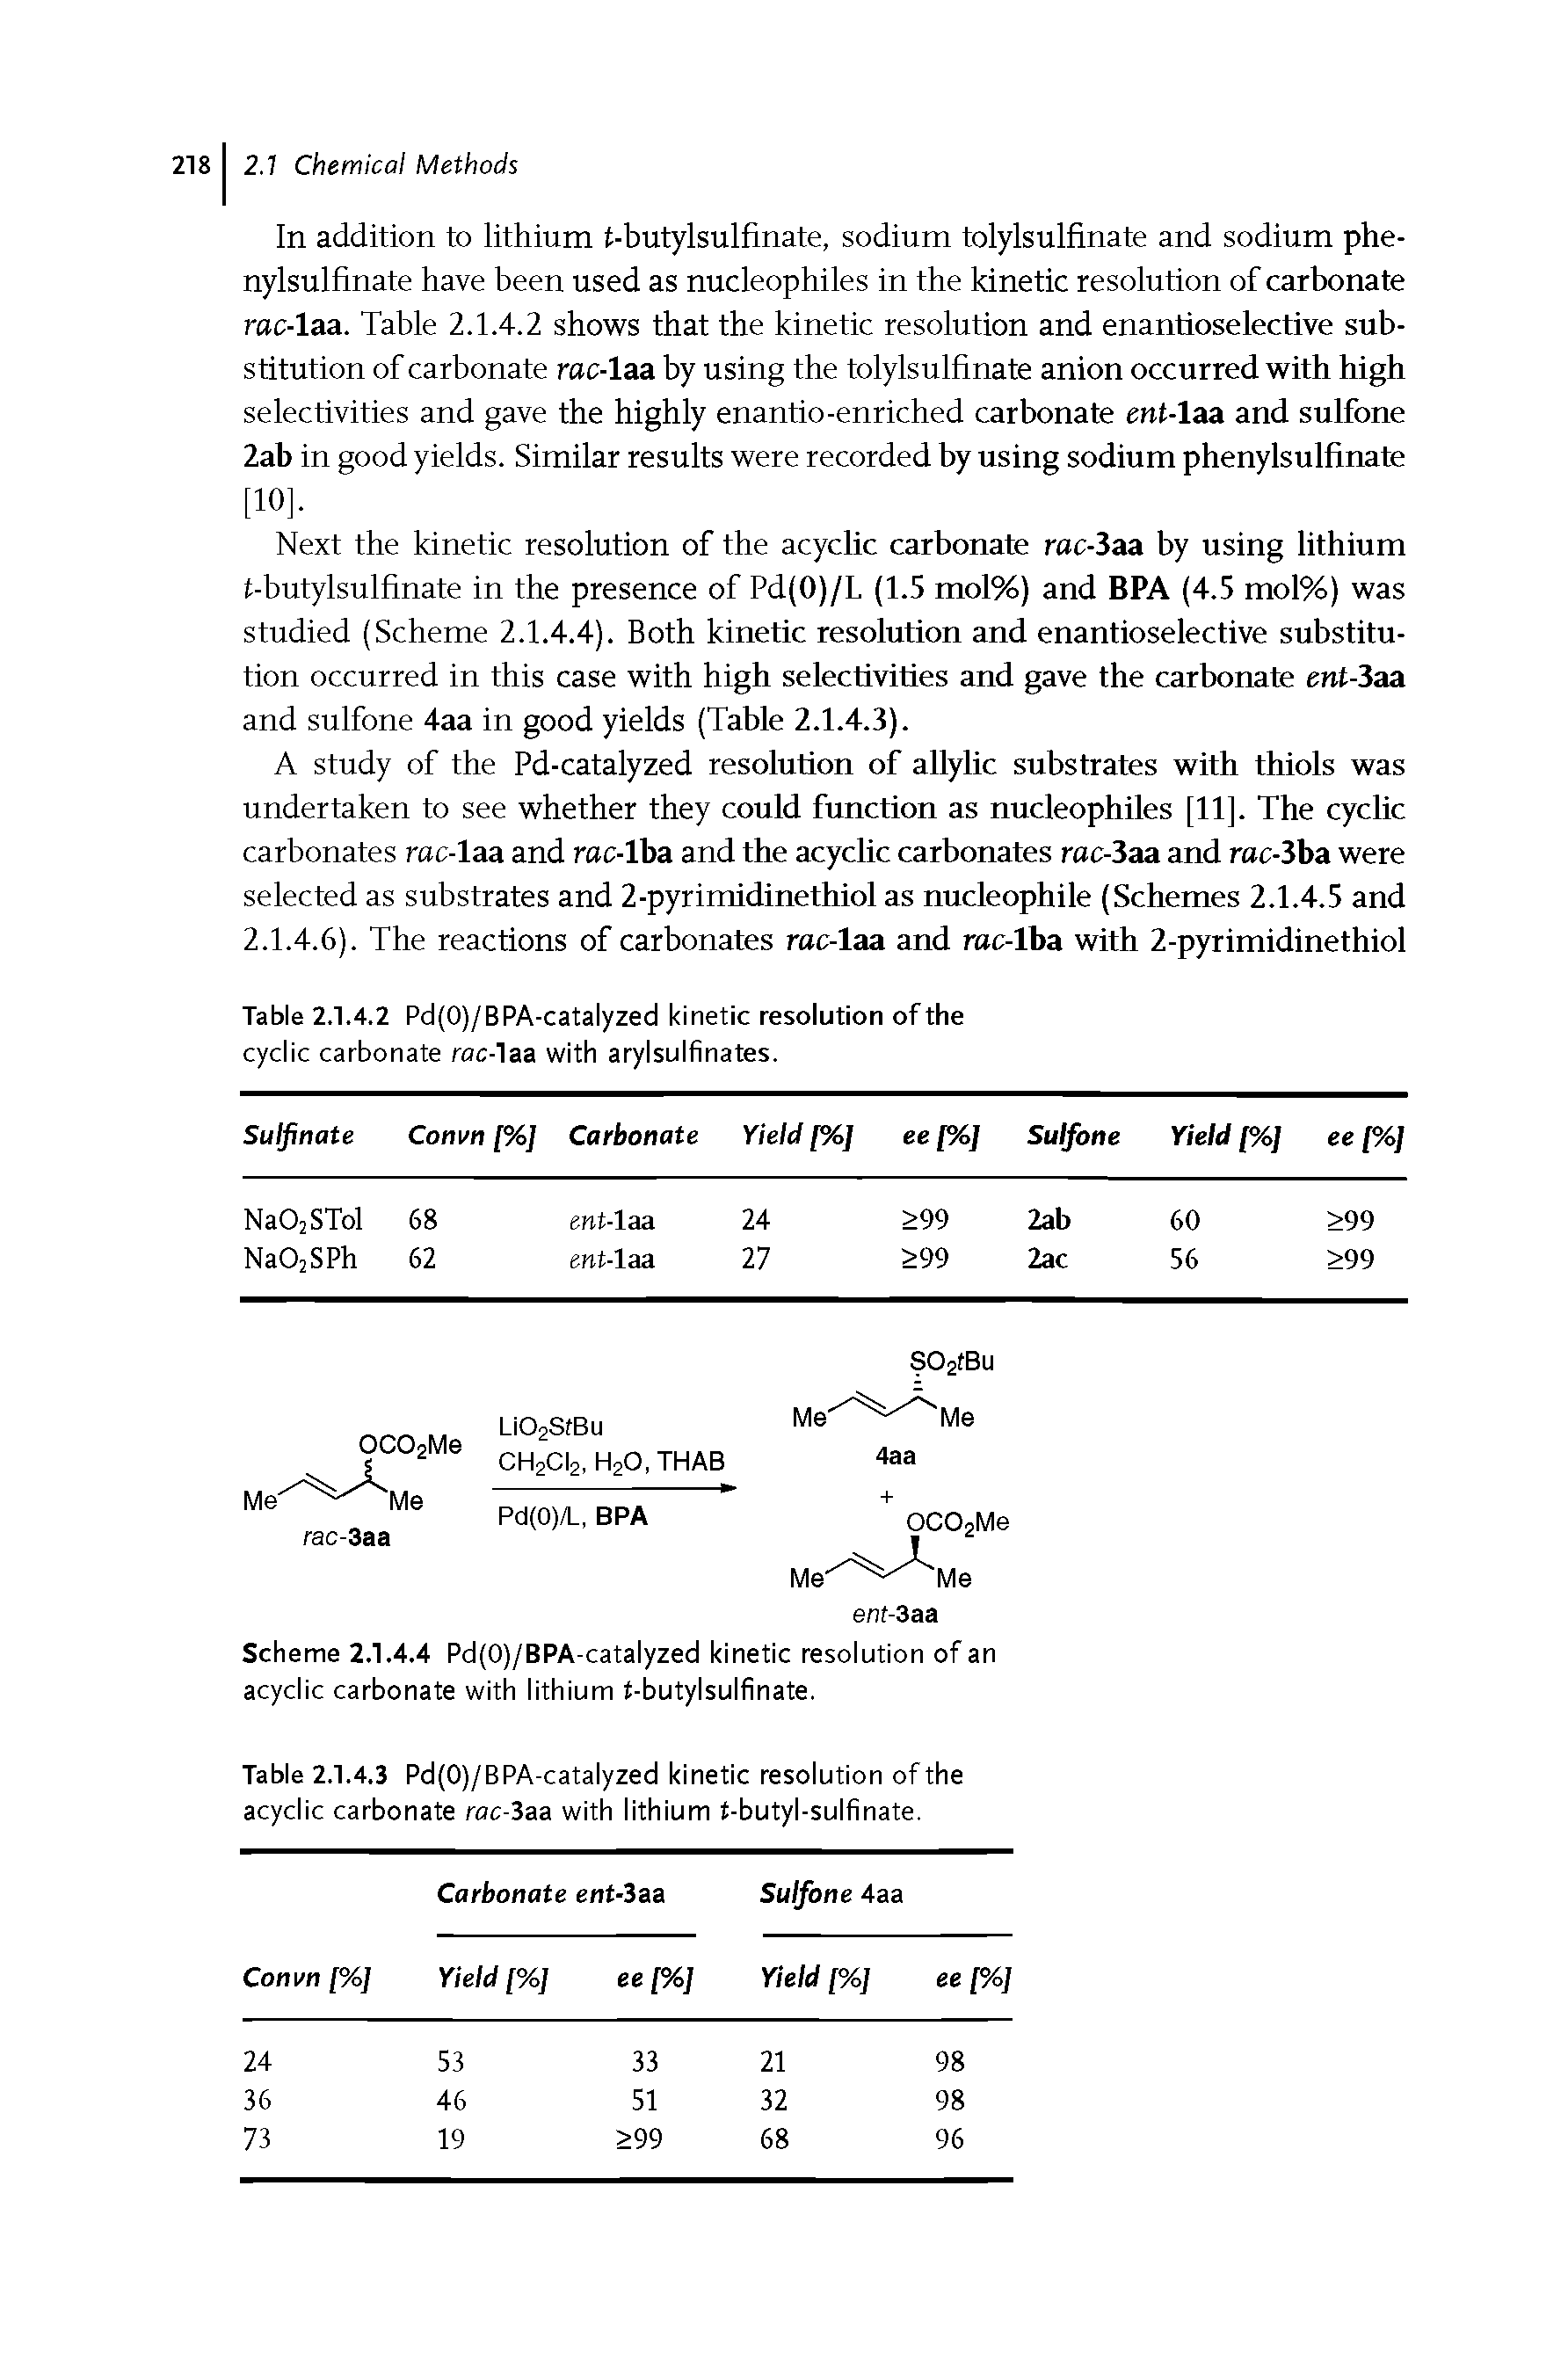 Table 2.1.4.2 Pd(0)/BPA-catalyzed kinetic resolution of the cyclic carbonate rac-laa with arylsulfinates.